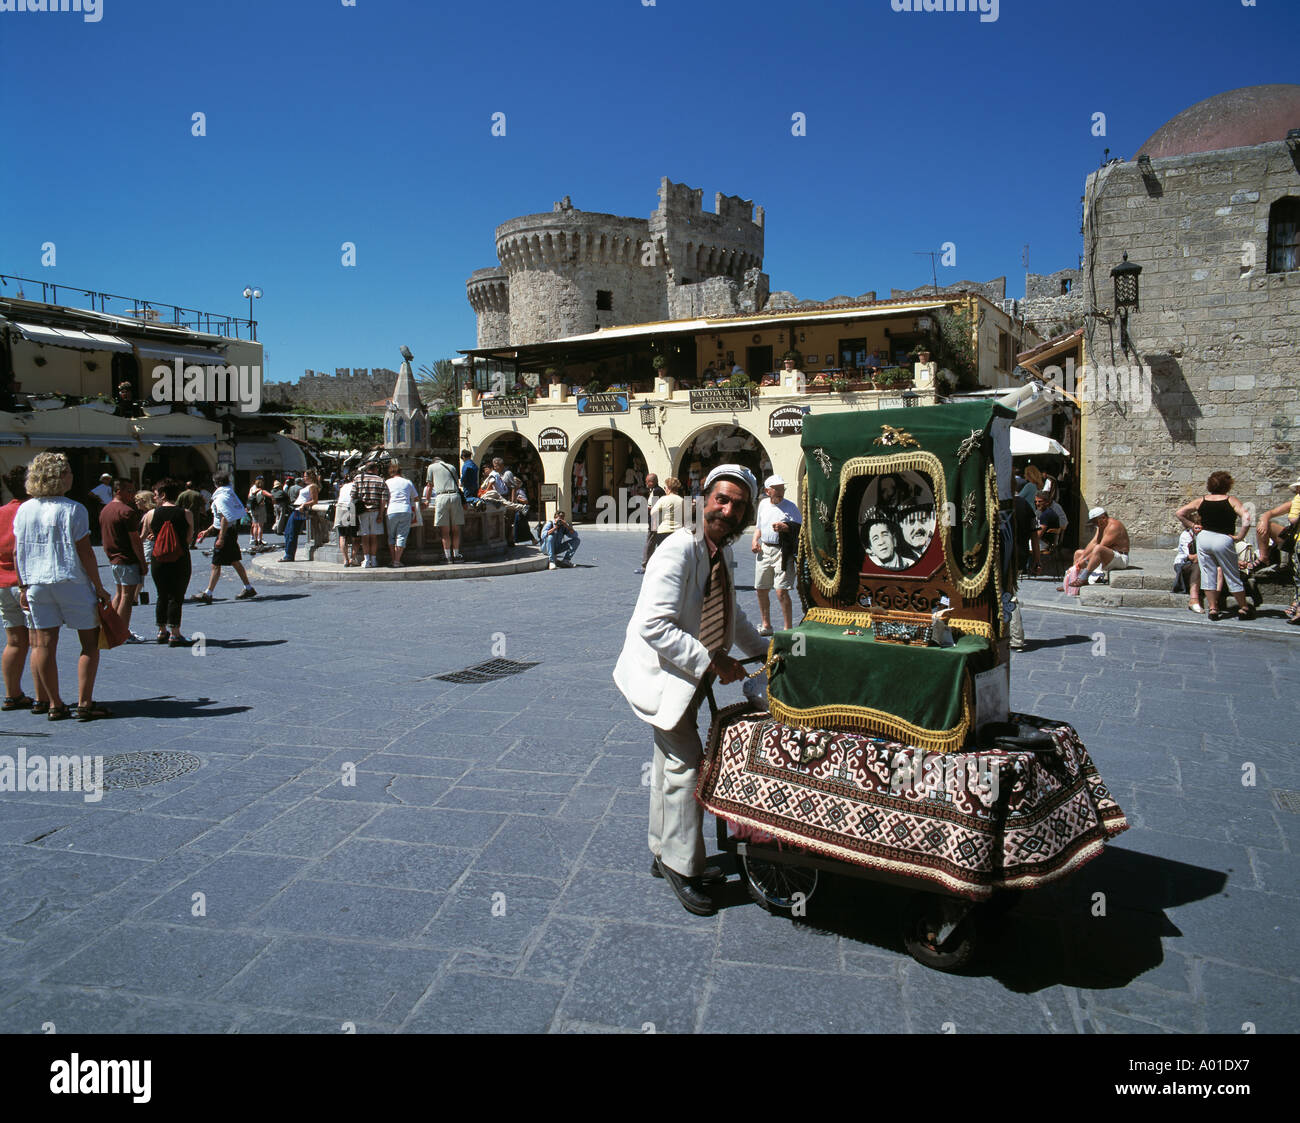 Greece, Rhodes, Dodecanese, GR-Rhodes Town, Ippokratu Square, tourists, tavernas, sidewalk cafes, Harbour Town Gate, barrel organ grinder, people, UNESCO World Heritage Site Stock Photo